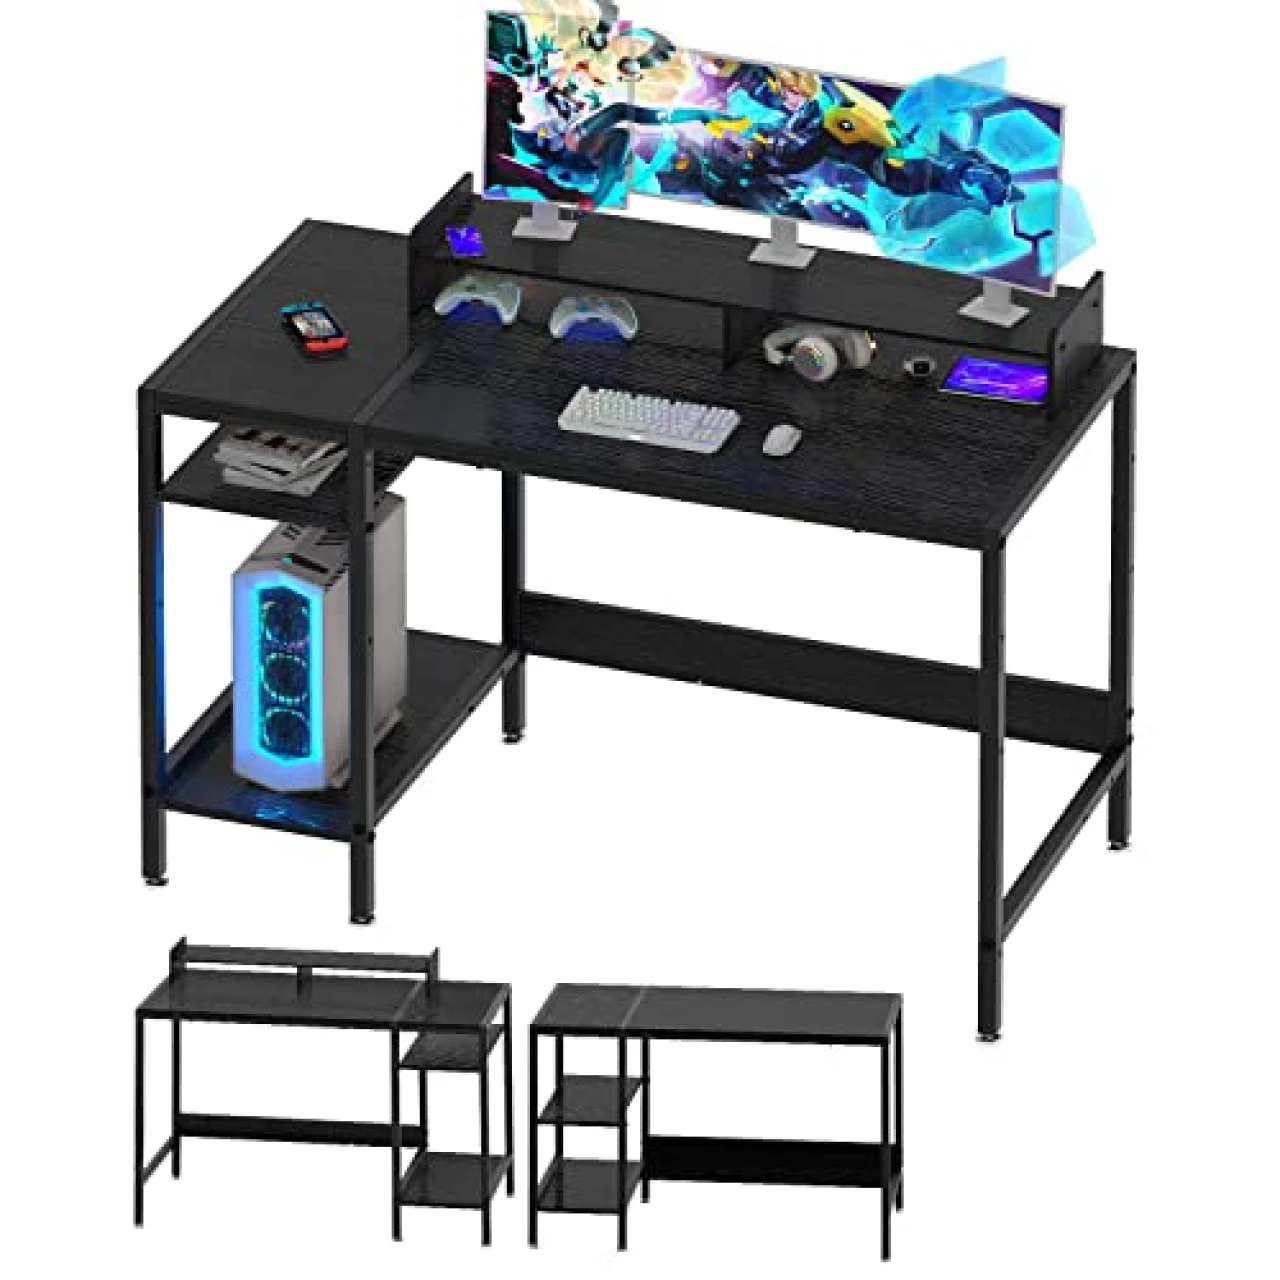 MINOSYS Computer Desk - 47” Gaming Desk, Home Office Desk with Storage, Small Desk with Monitor Stand, Writing Desk for 2 Monitors, Adjustable Storage Space, Modern Design Corner Table, Black.